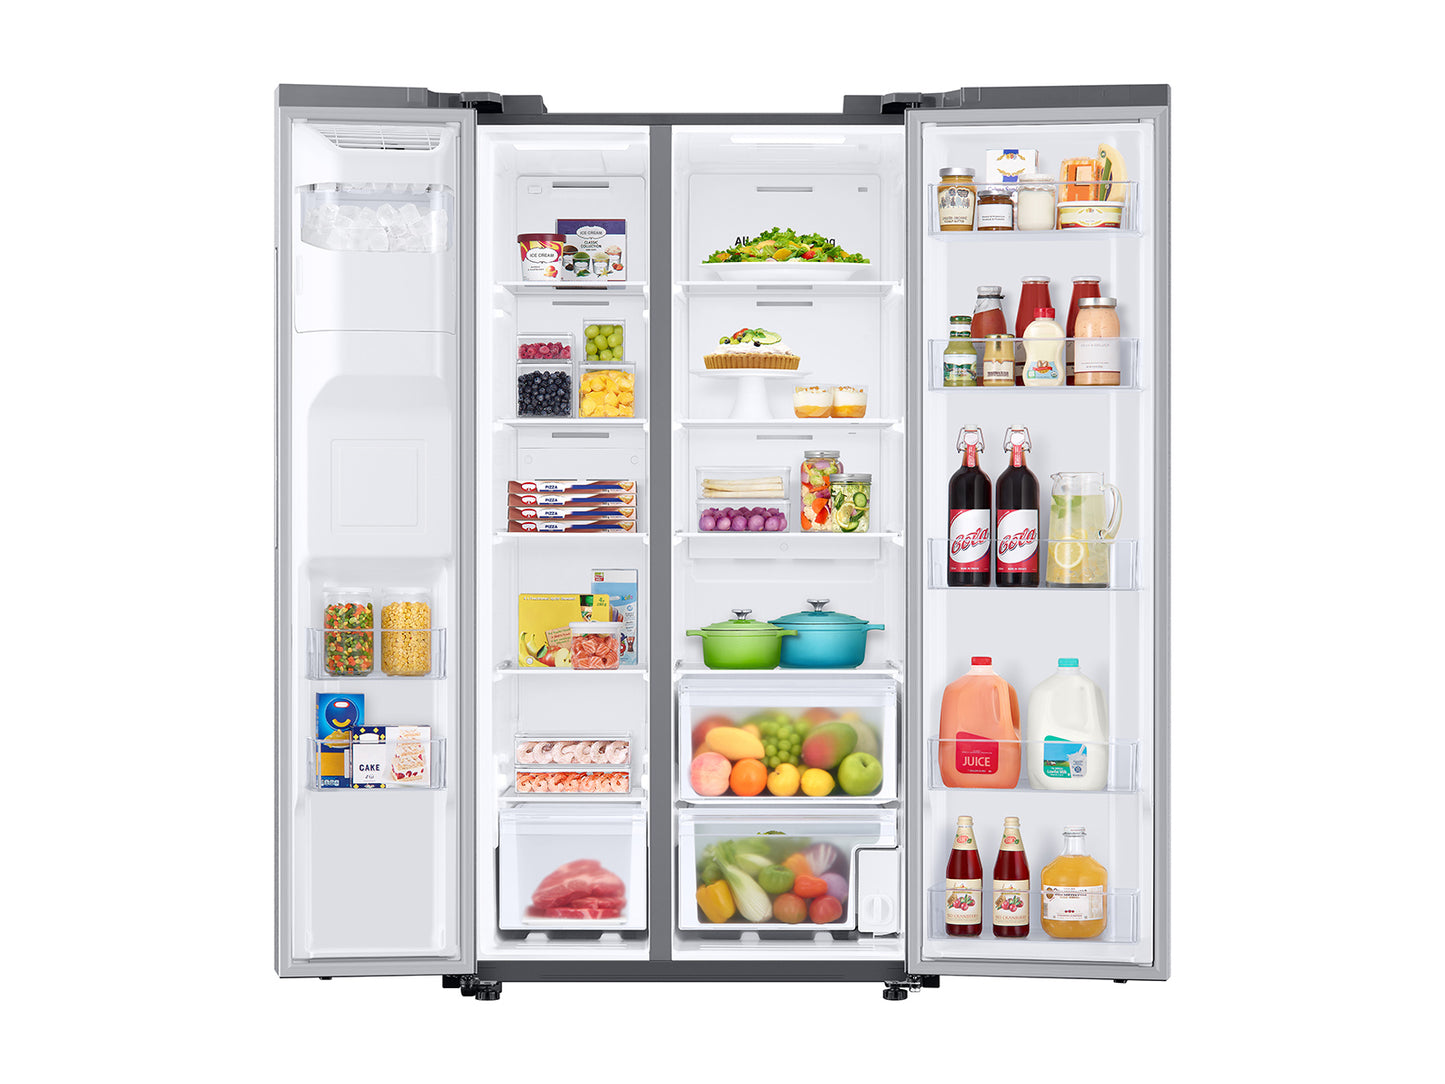 Samsung 27.4 cu. ft. Large Capacity Side-by-Side Refrigerator in Stainless Steel